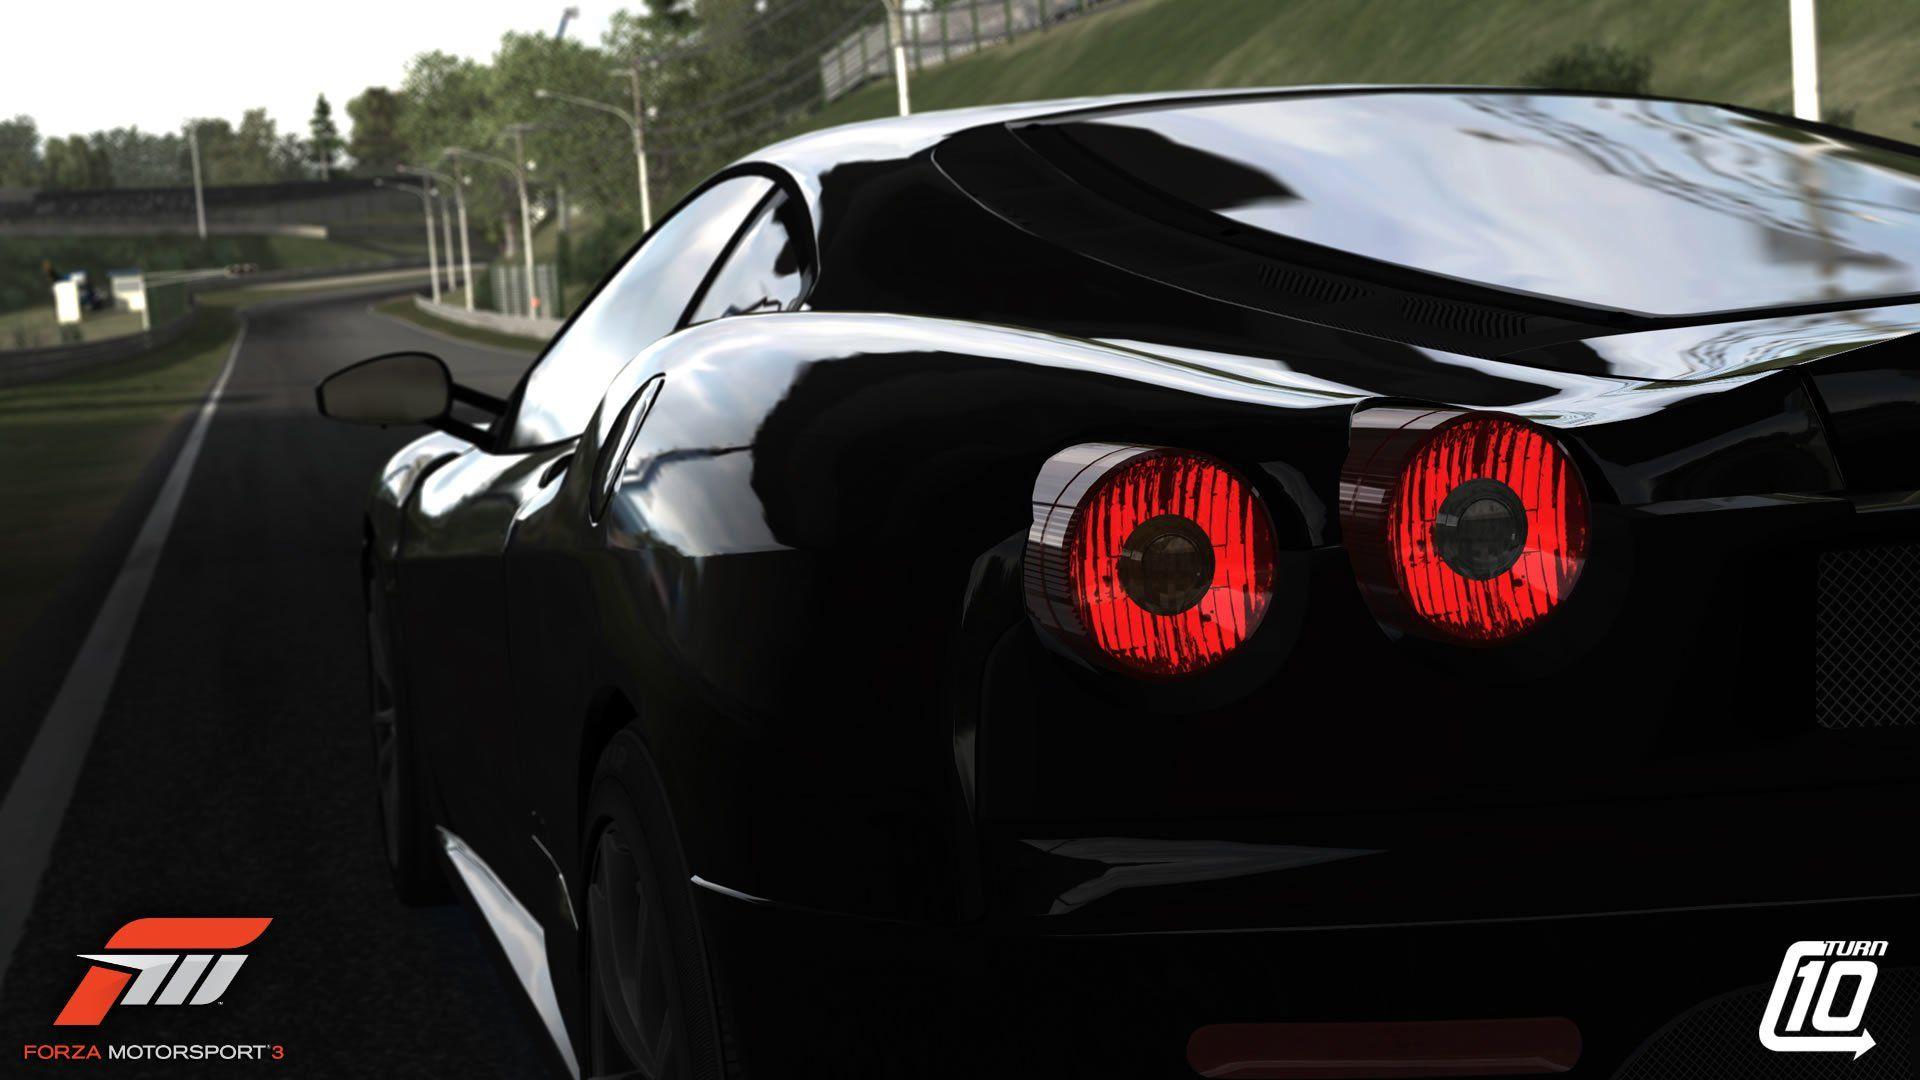 Forza Motorsport Full HD Wallpapers and Backgrounds